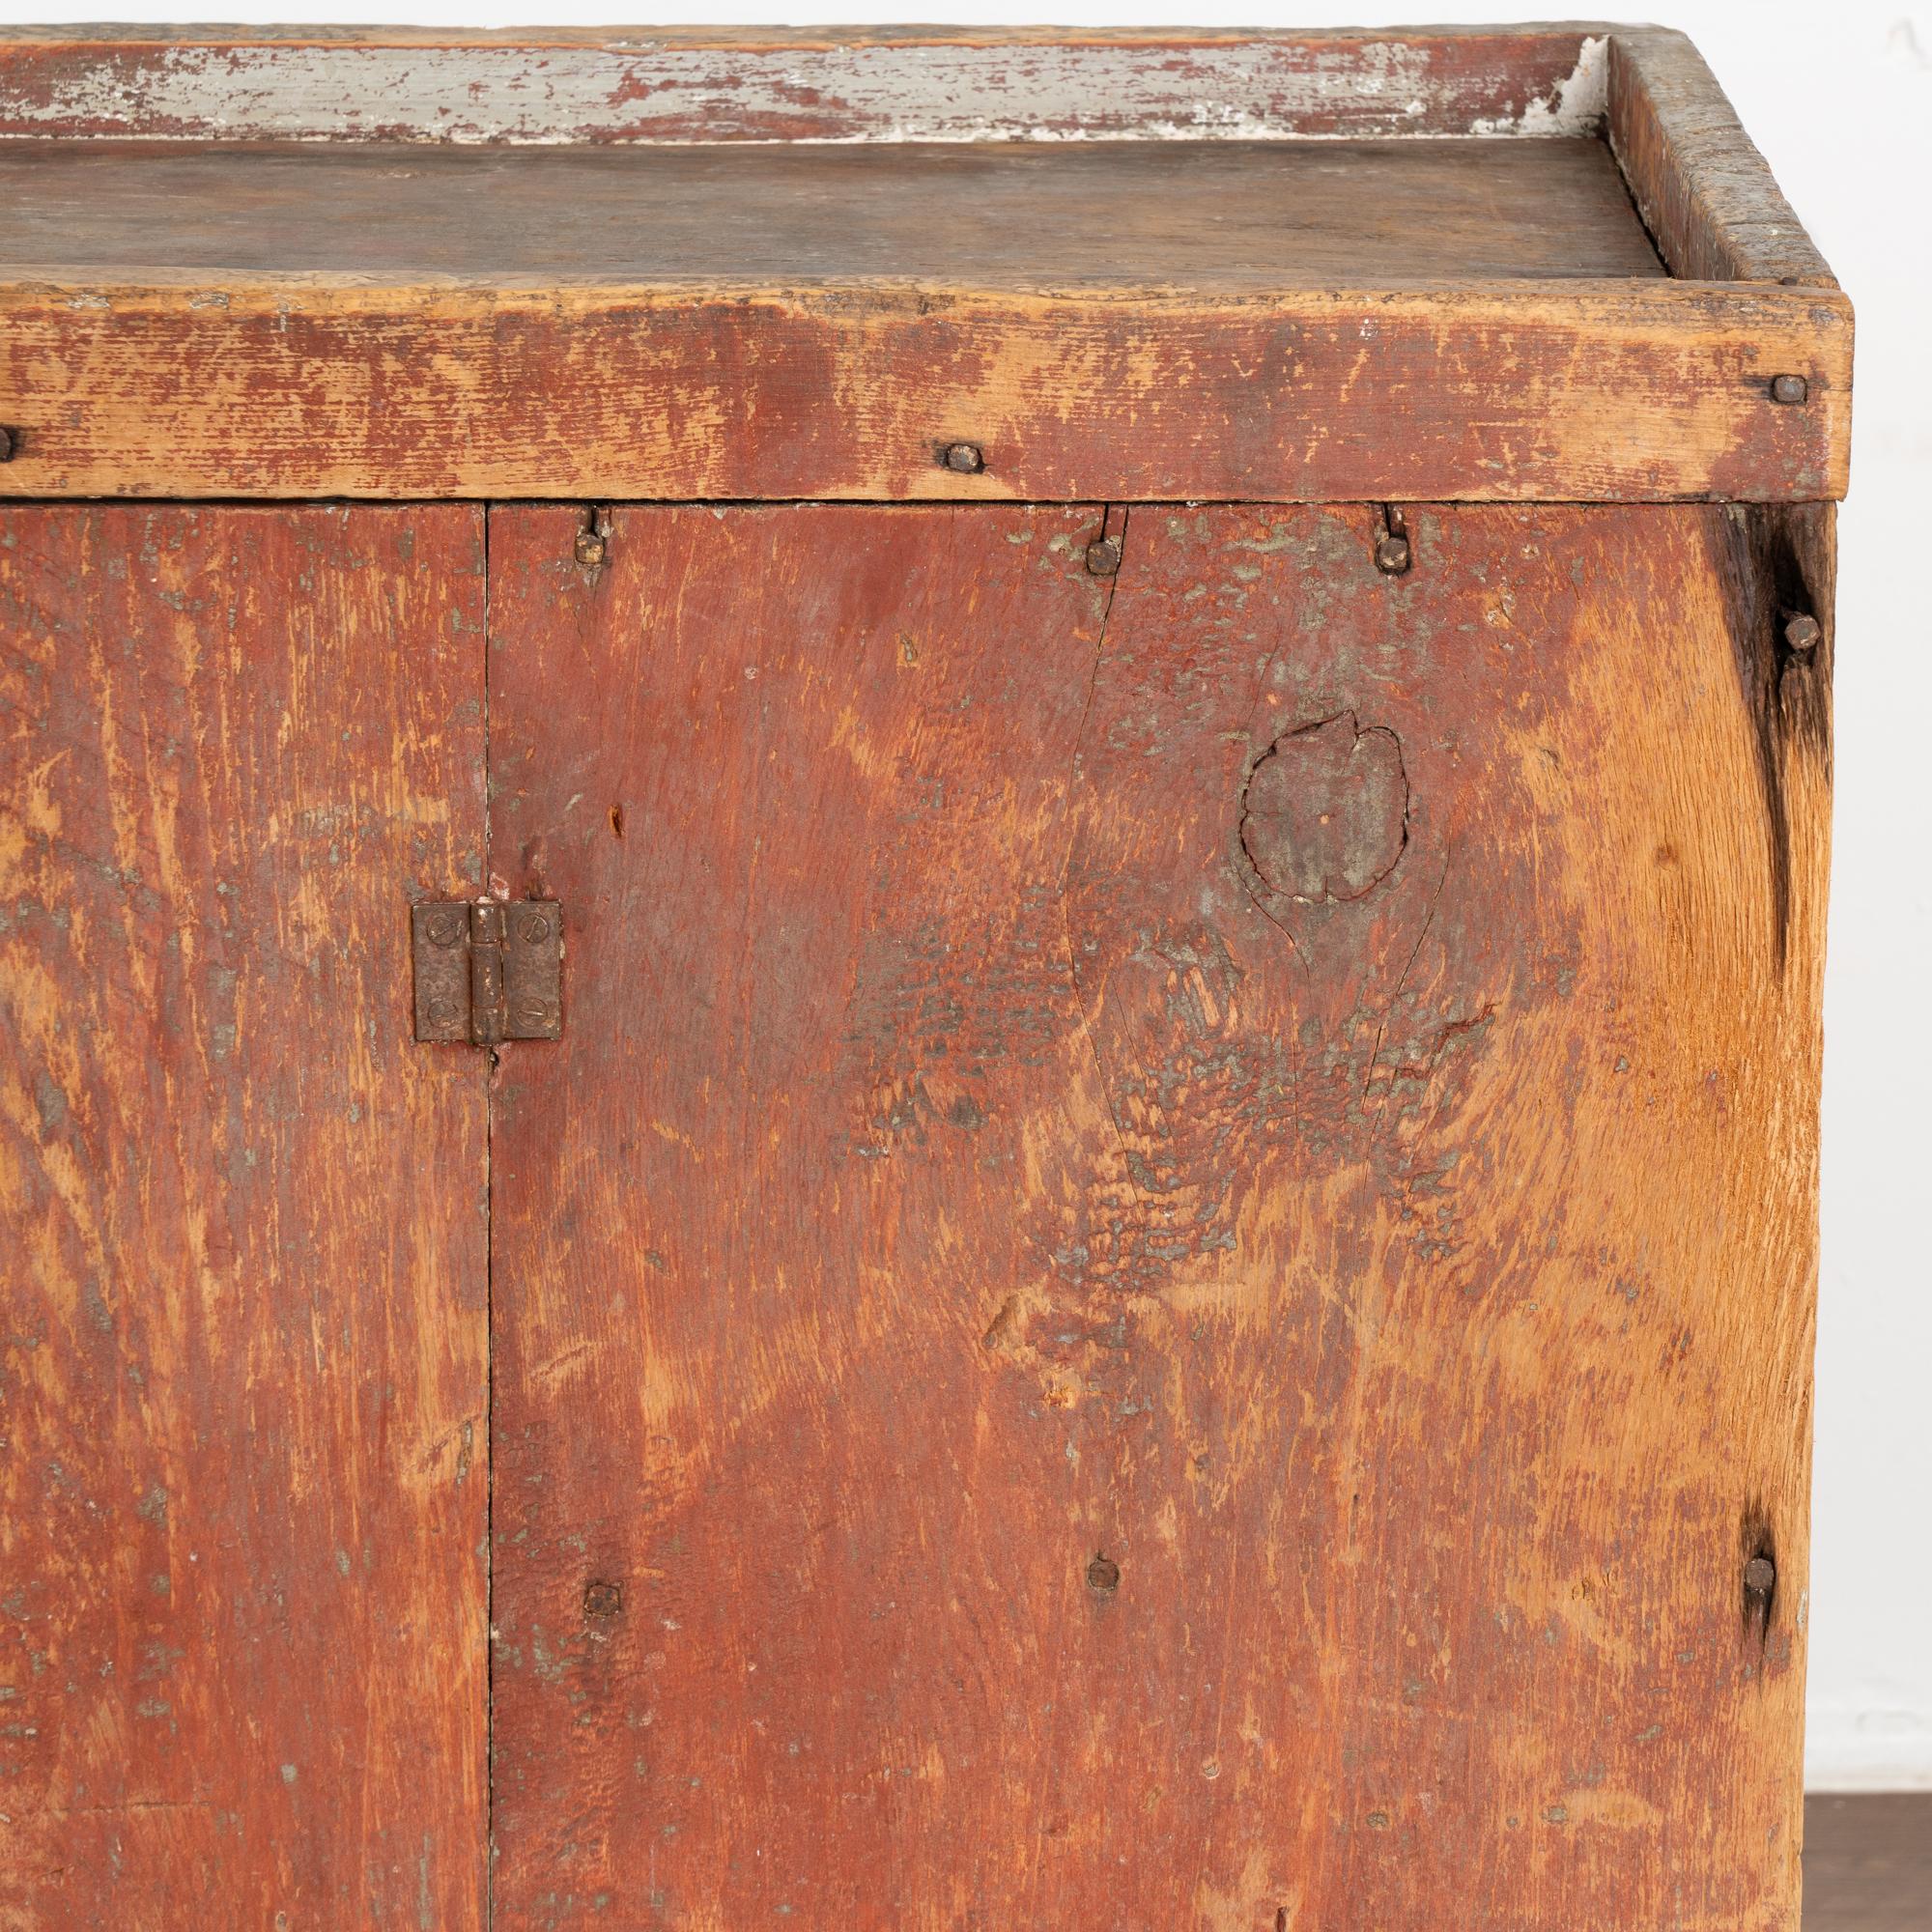 Original Red Painted Rustic Narrow Pine Cabinet, Sweden circa 1840-60 For Sale 1